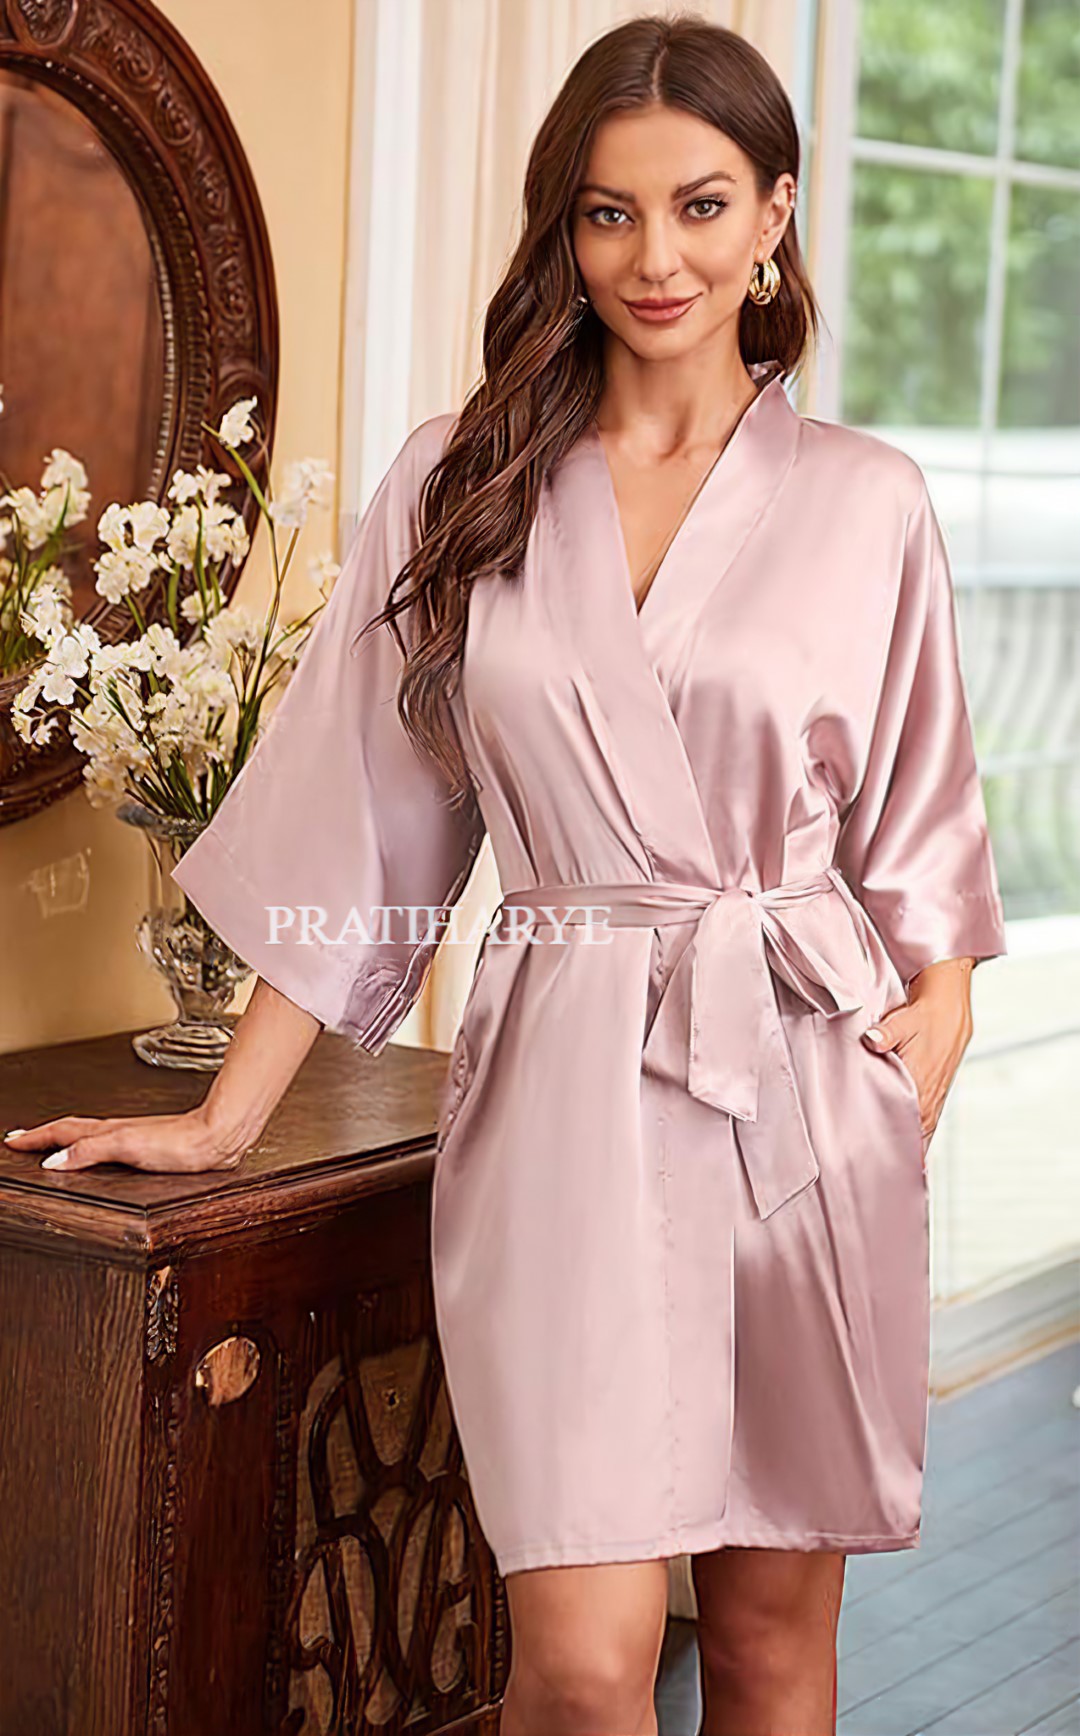 Plain satin Babydoll with chiffon robe Nightgown set - Private Lives